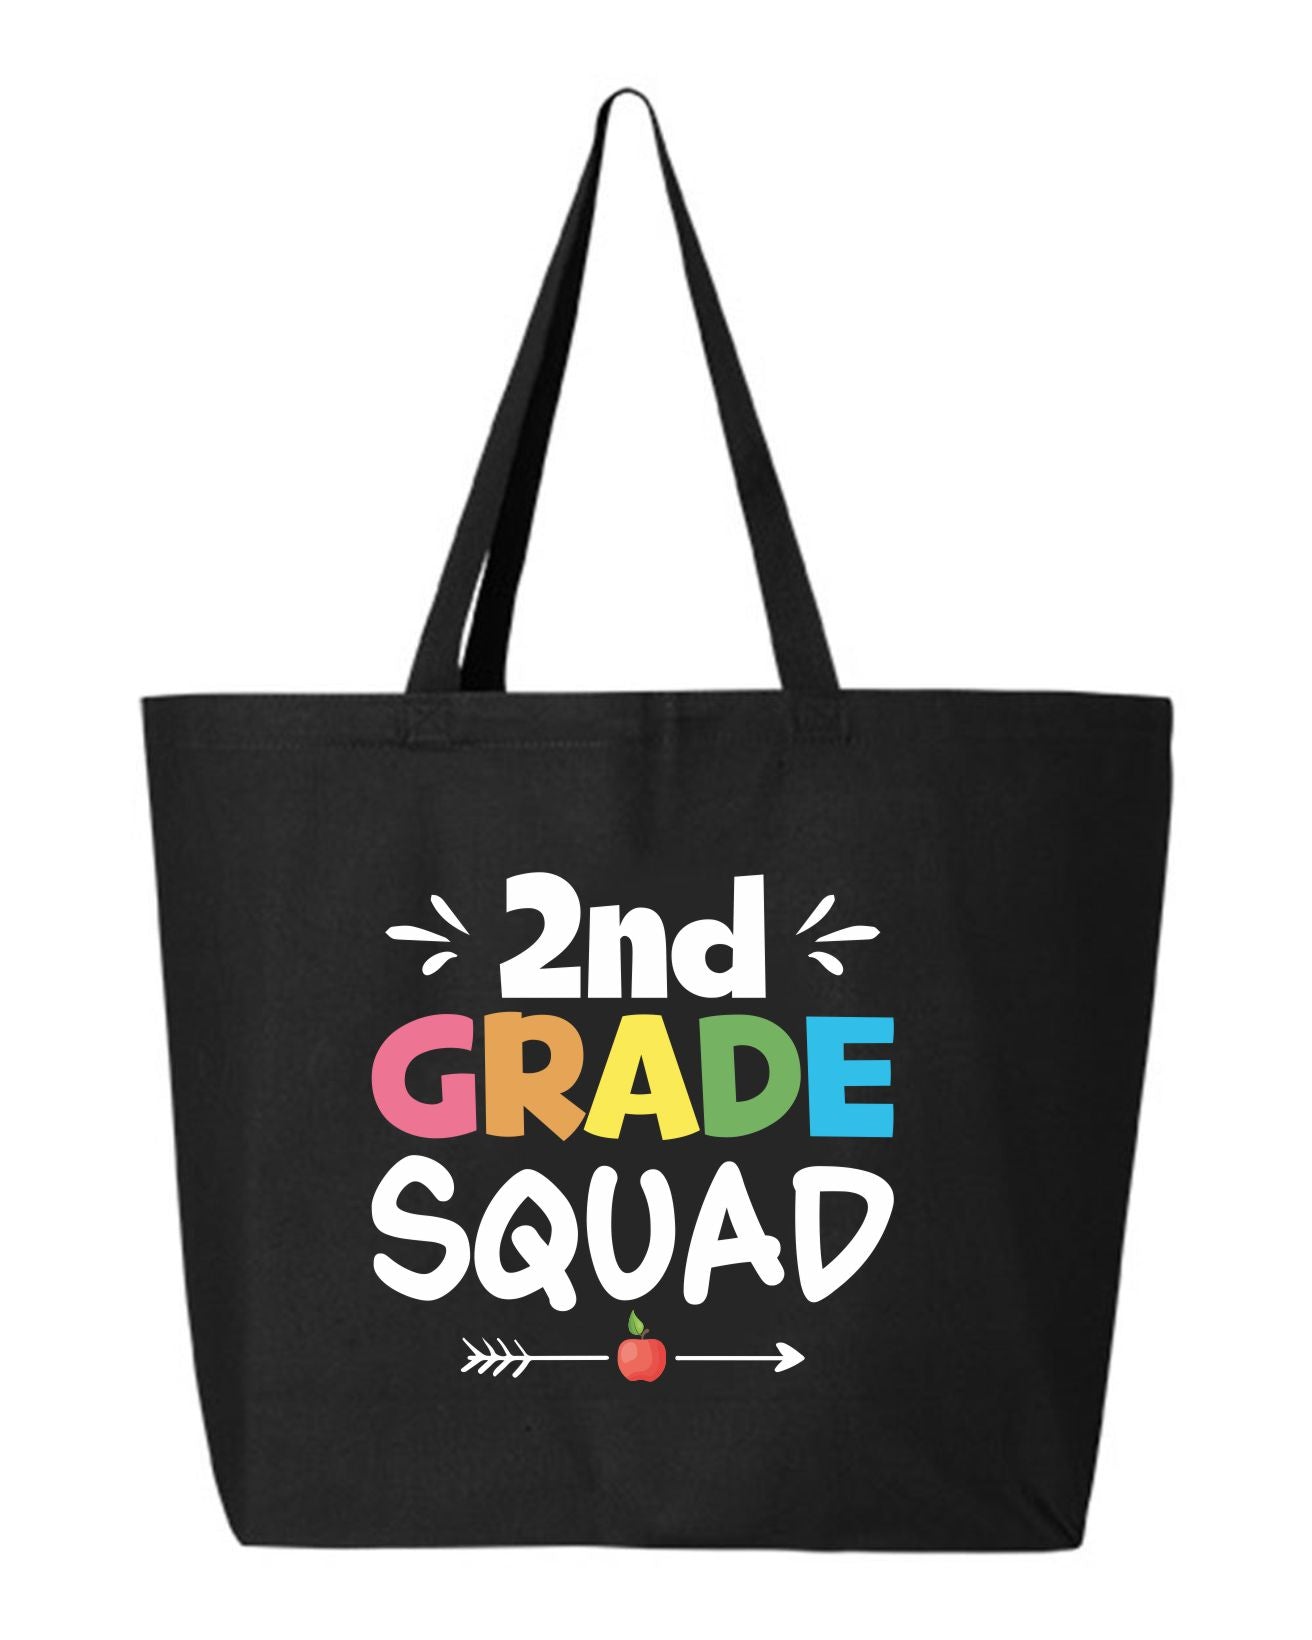 2nd Grade Squad - Supportive Teacher Tote Bag